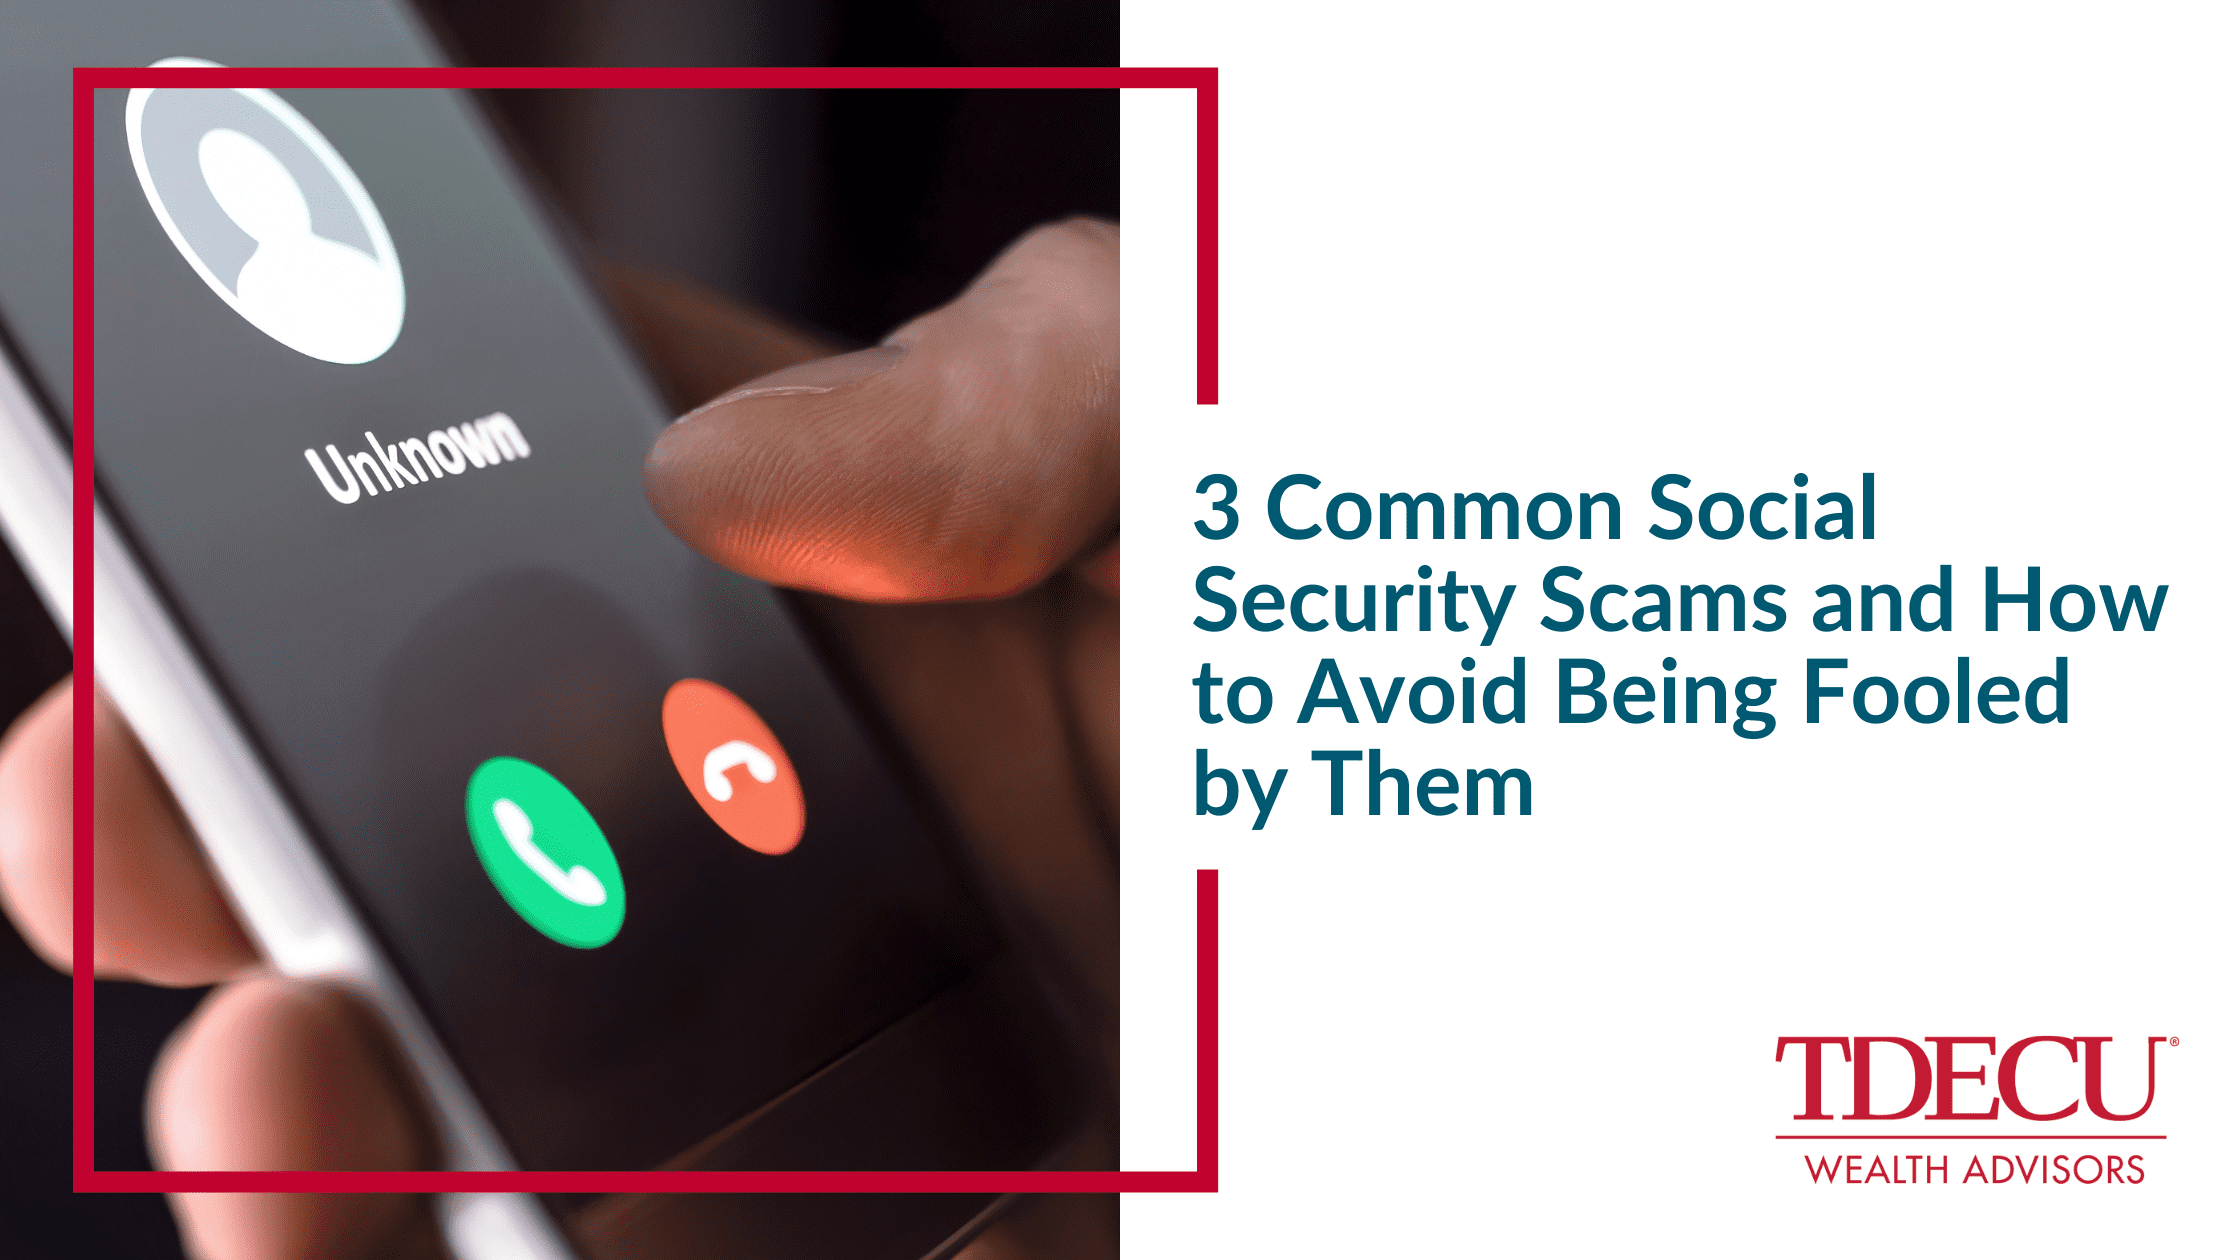 3 Common Social Security Scams and How To Avoid Being Fooled by Them